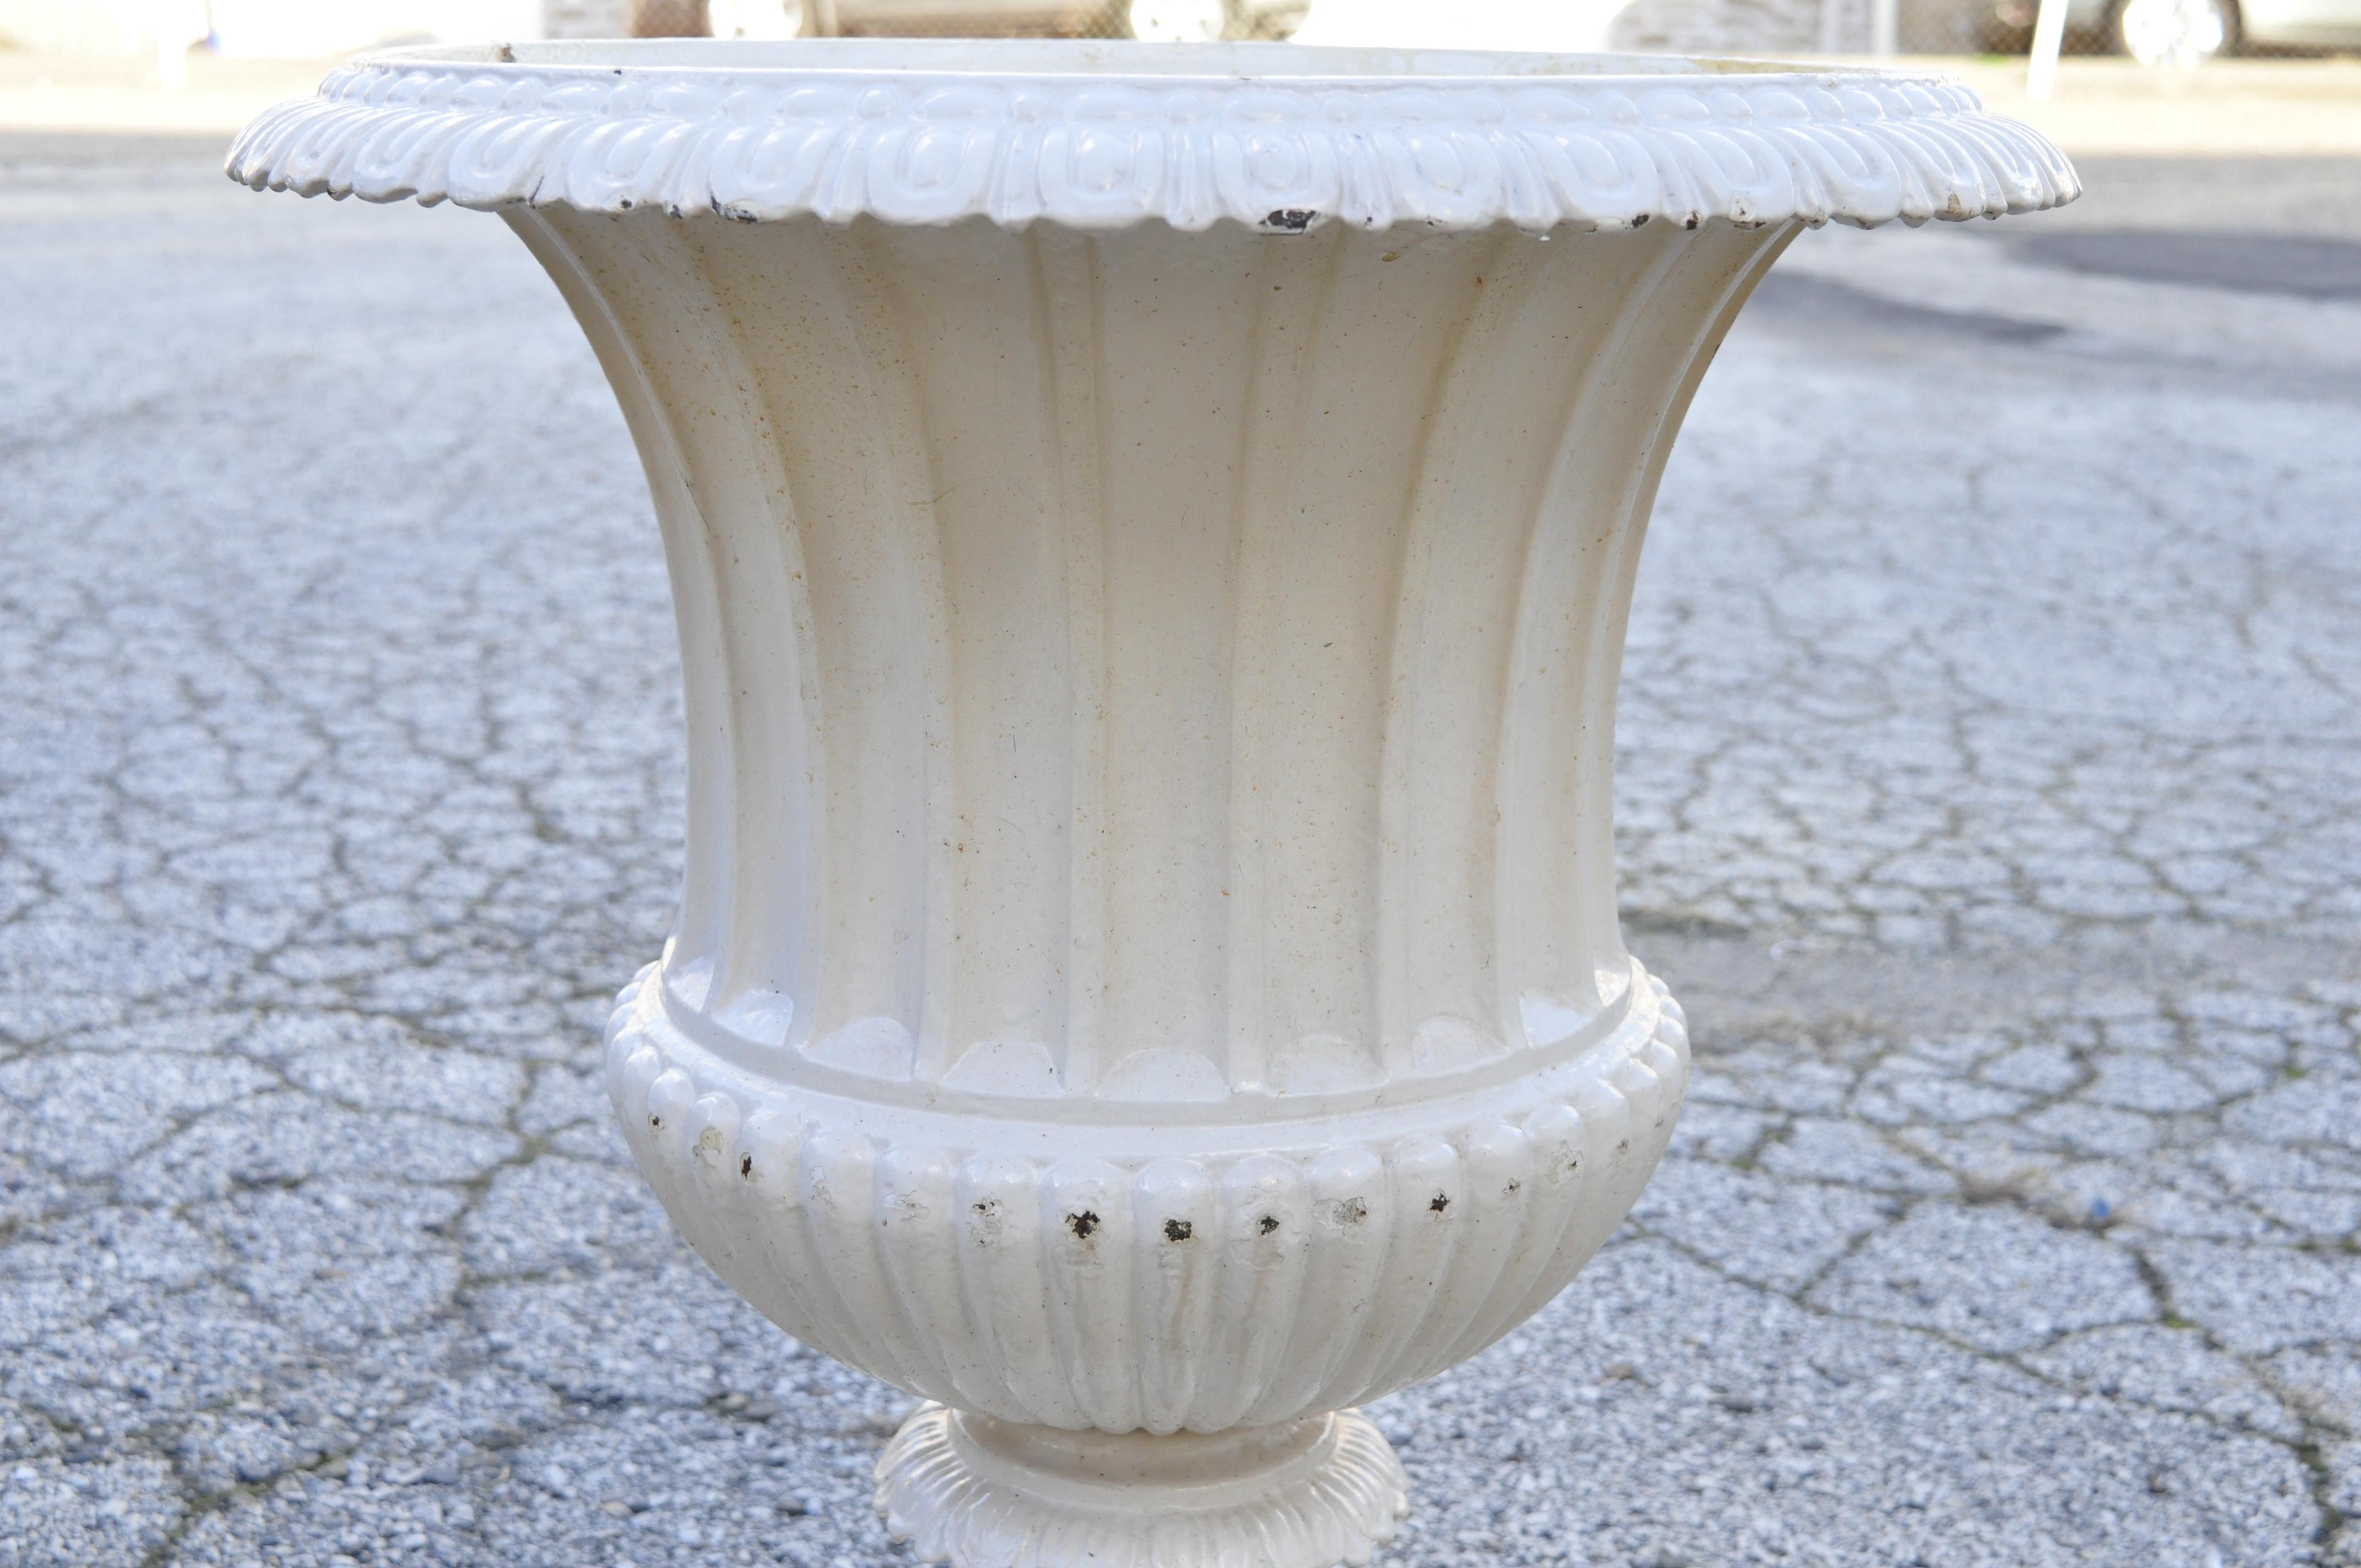 American Classical Vintage Italian Classical Cast Iron Large Urn Form Garden Outdoor Planter